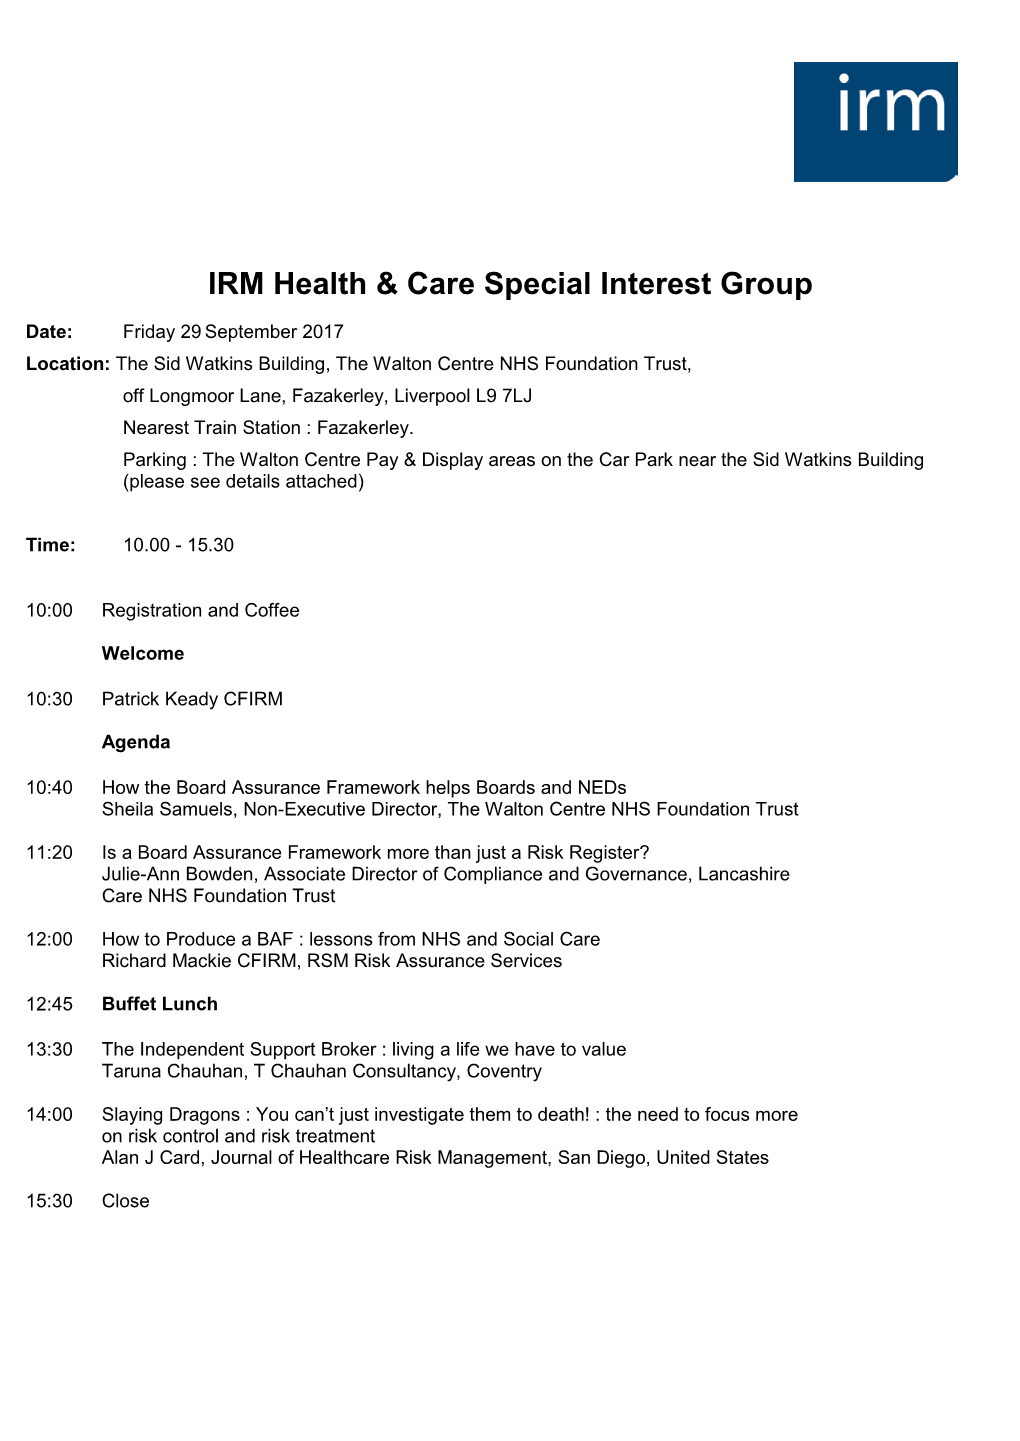 IRM Health & Care Special Interest Group